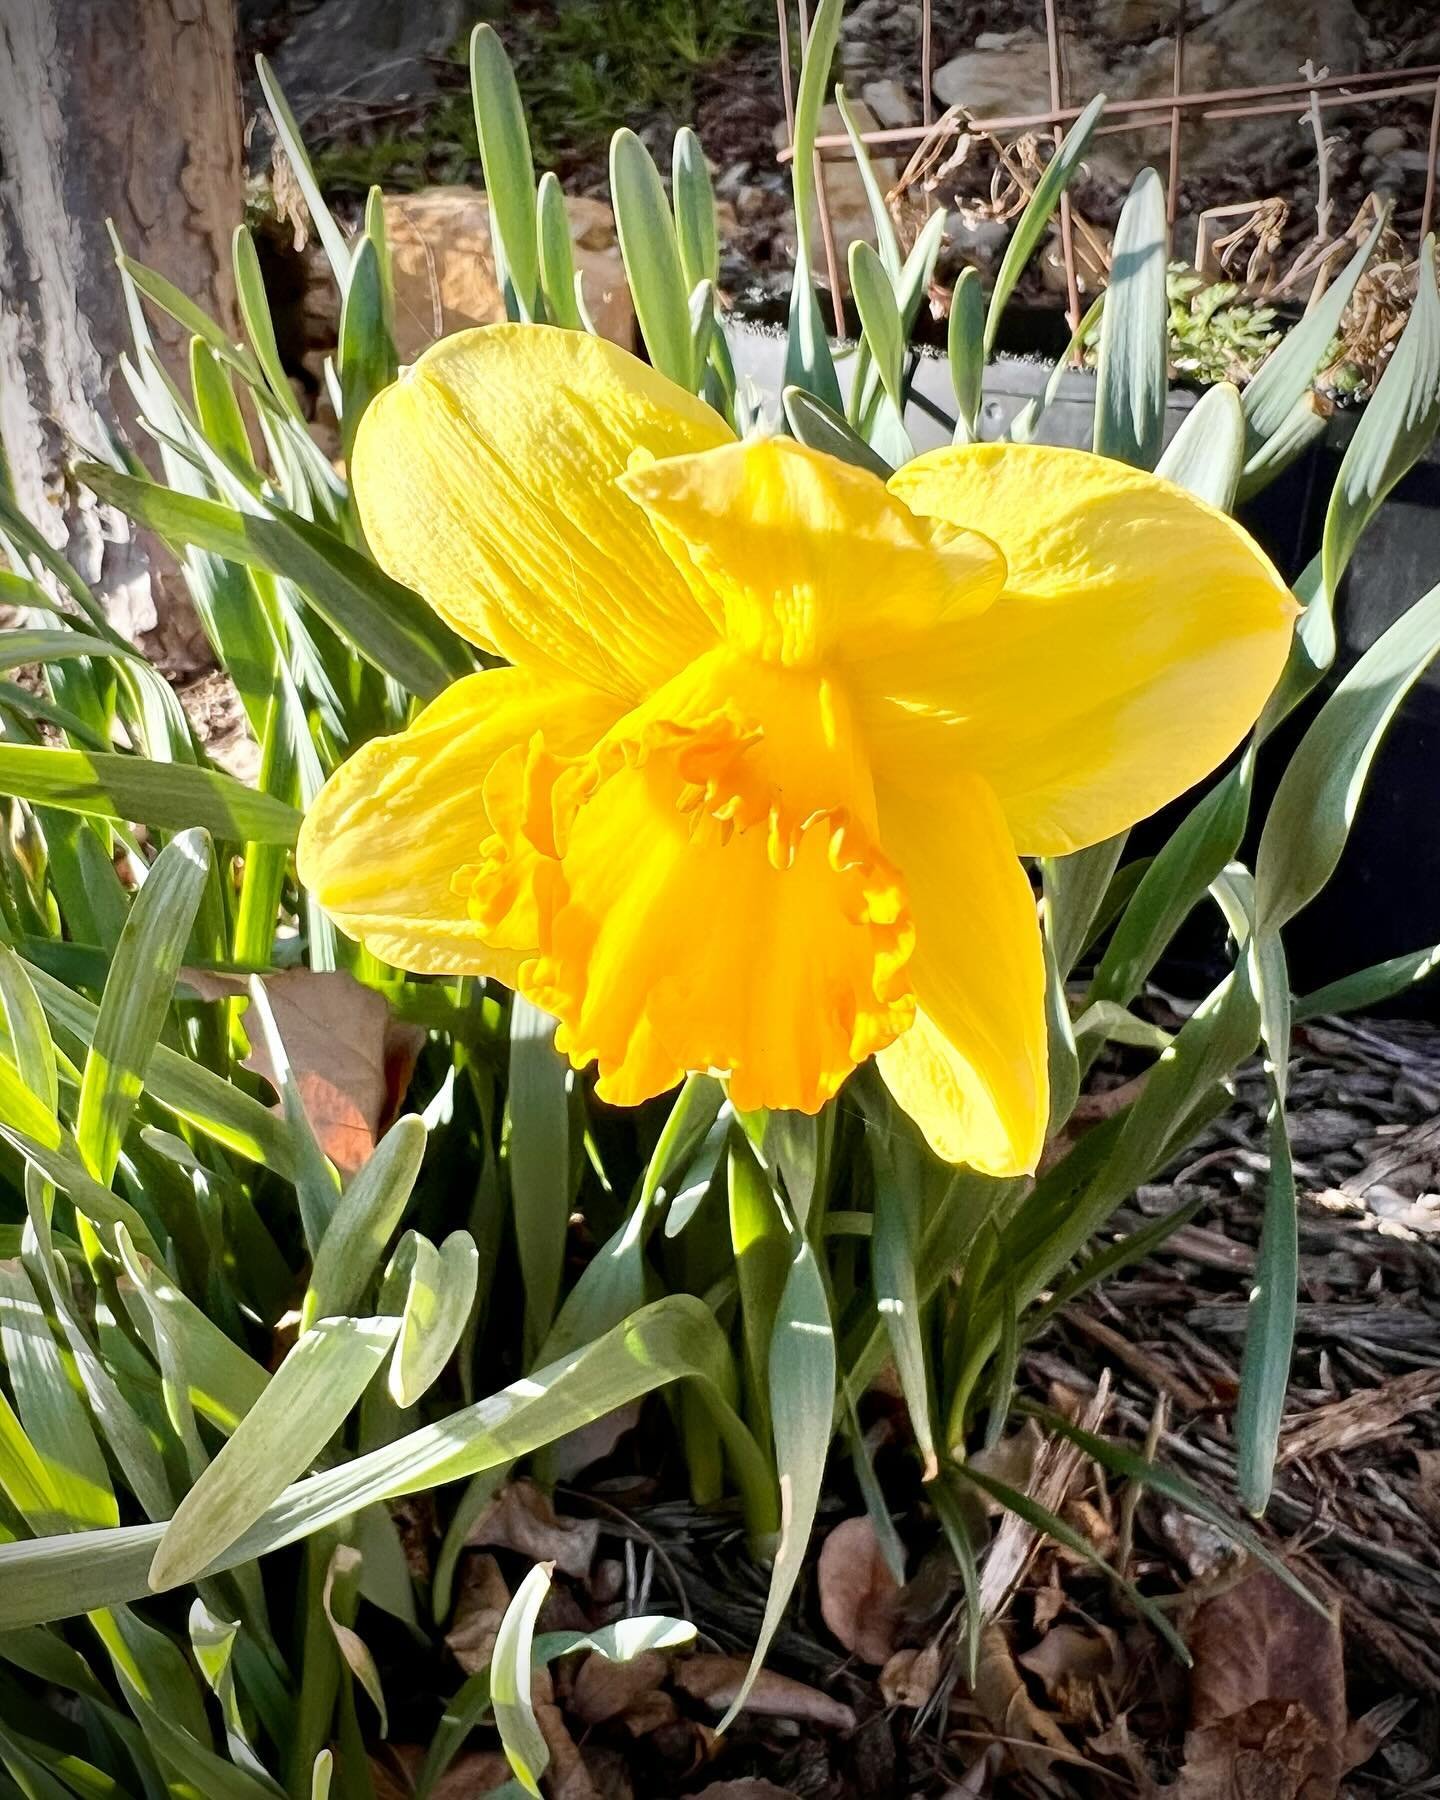 Happy First Day of Spring from McGregor&rsquo;s Bluffside Garden! 🌷

#mcgregoriowa #portsofdiscovery #spring #firstdayofspring #daffodils #springflowers